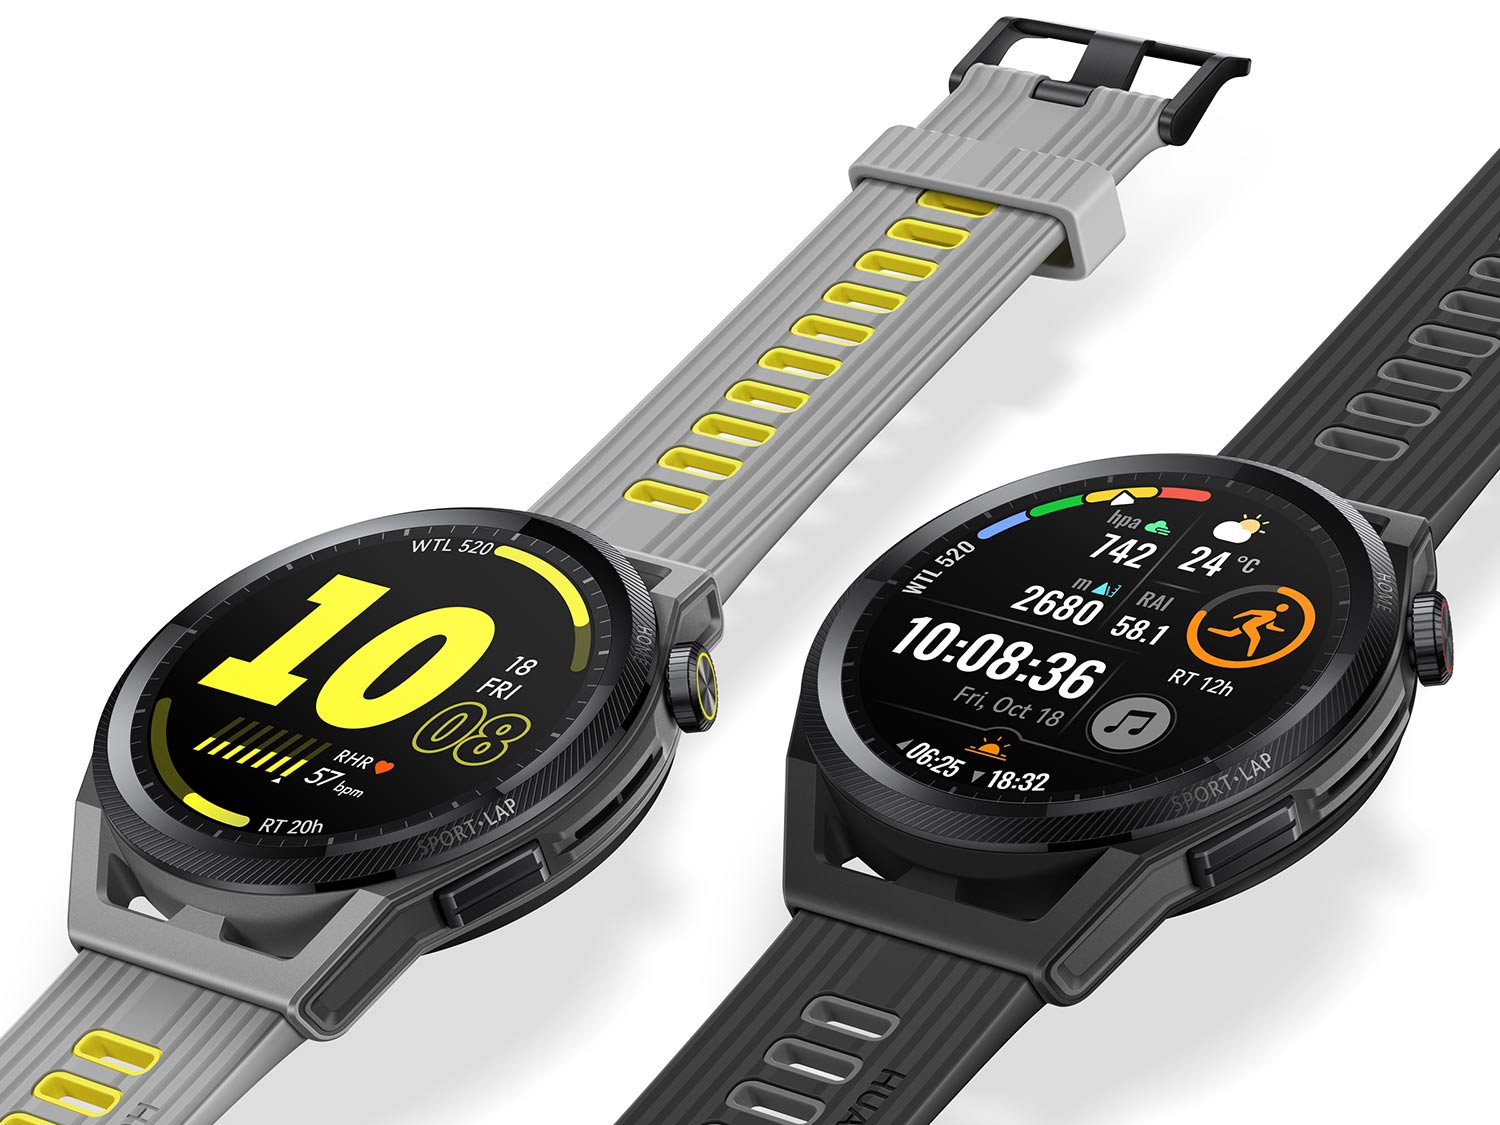 Huawei’s latest watch built for sports launches in Qatar